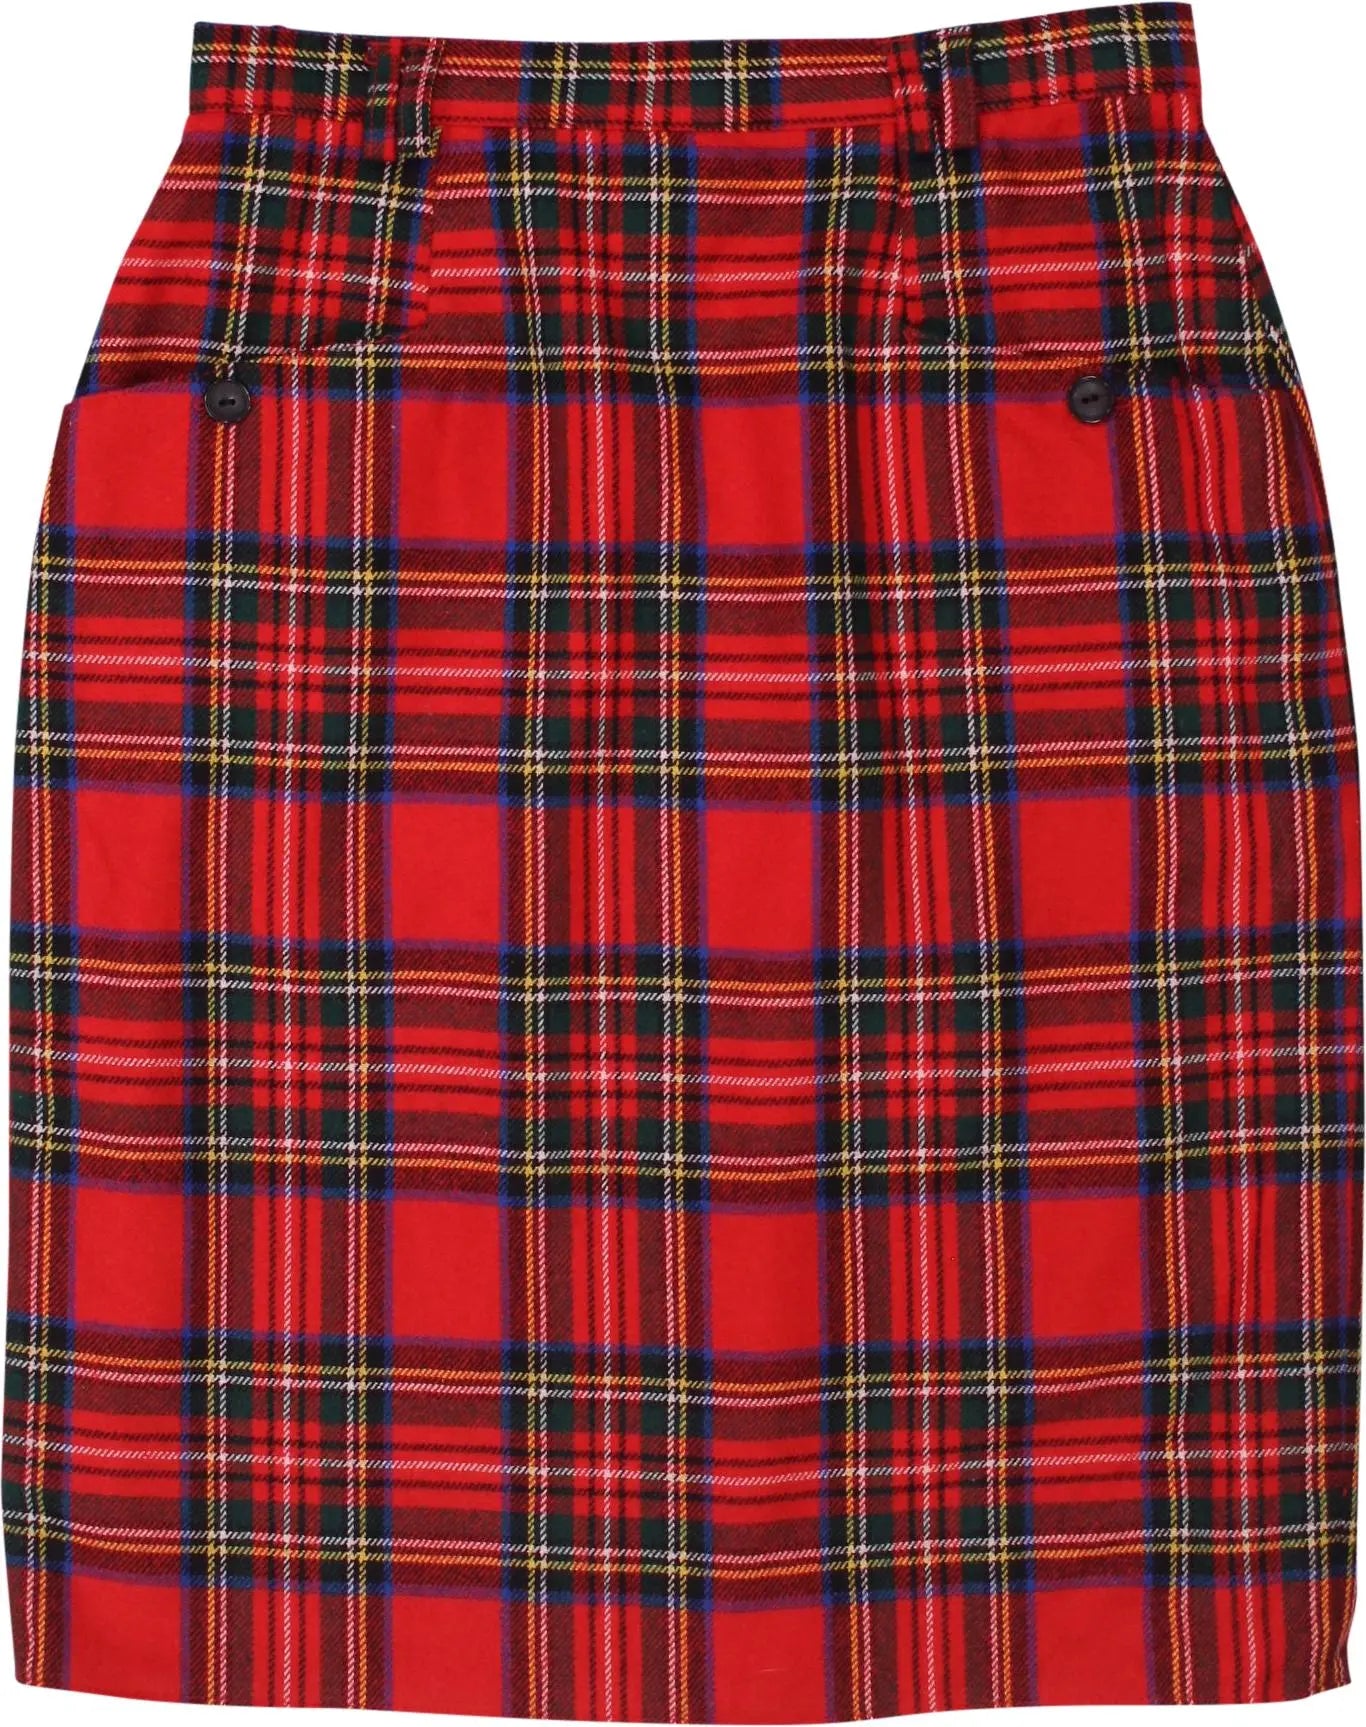 Unknown - Tartan Skirt- ThriftTale.com - Vintage and second handclothing